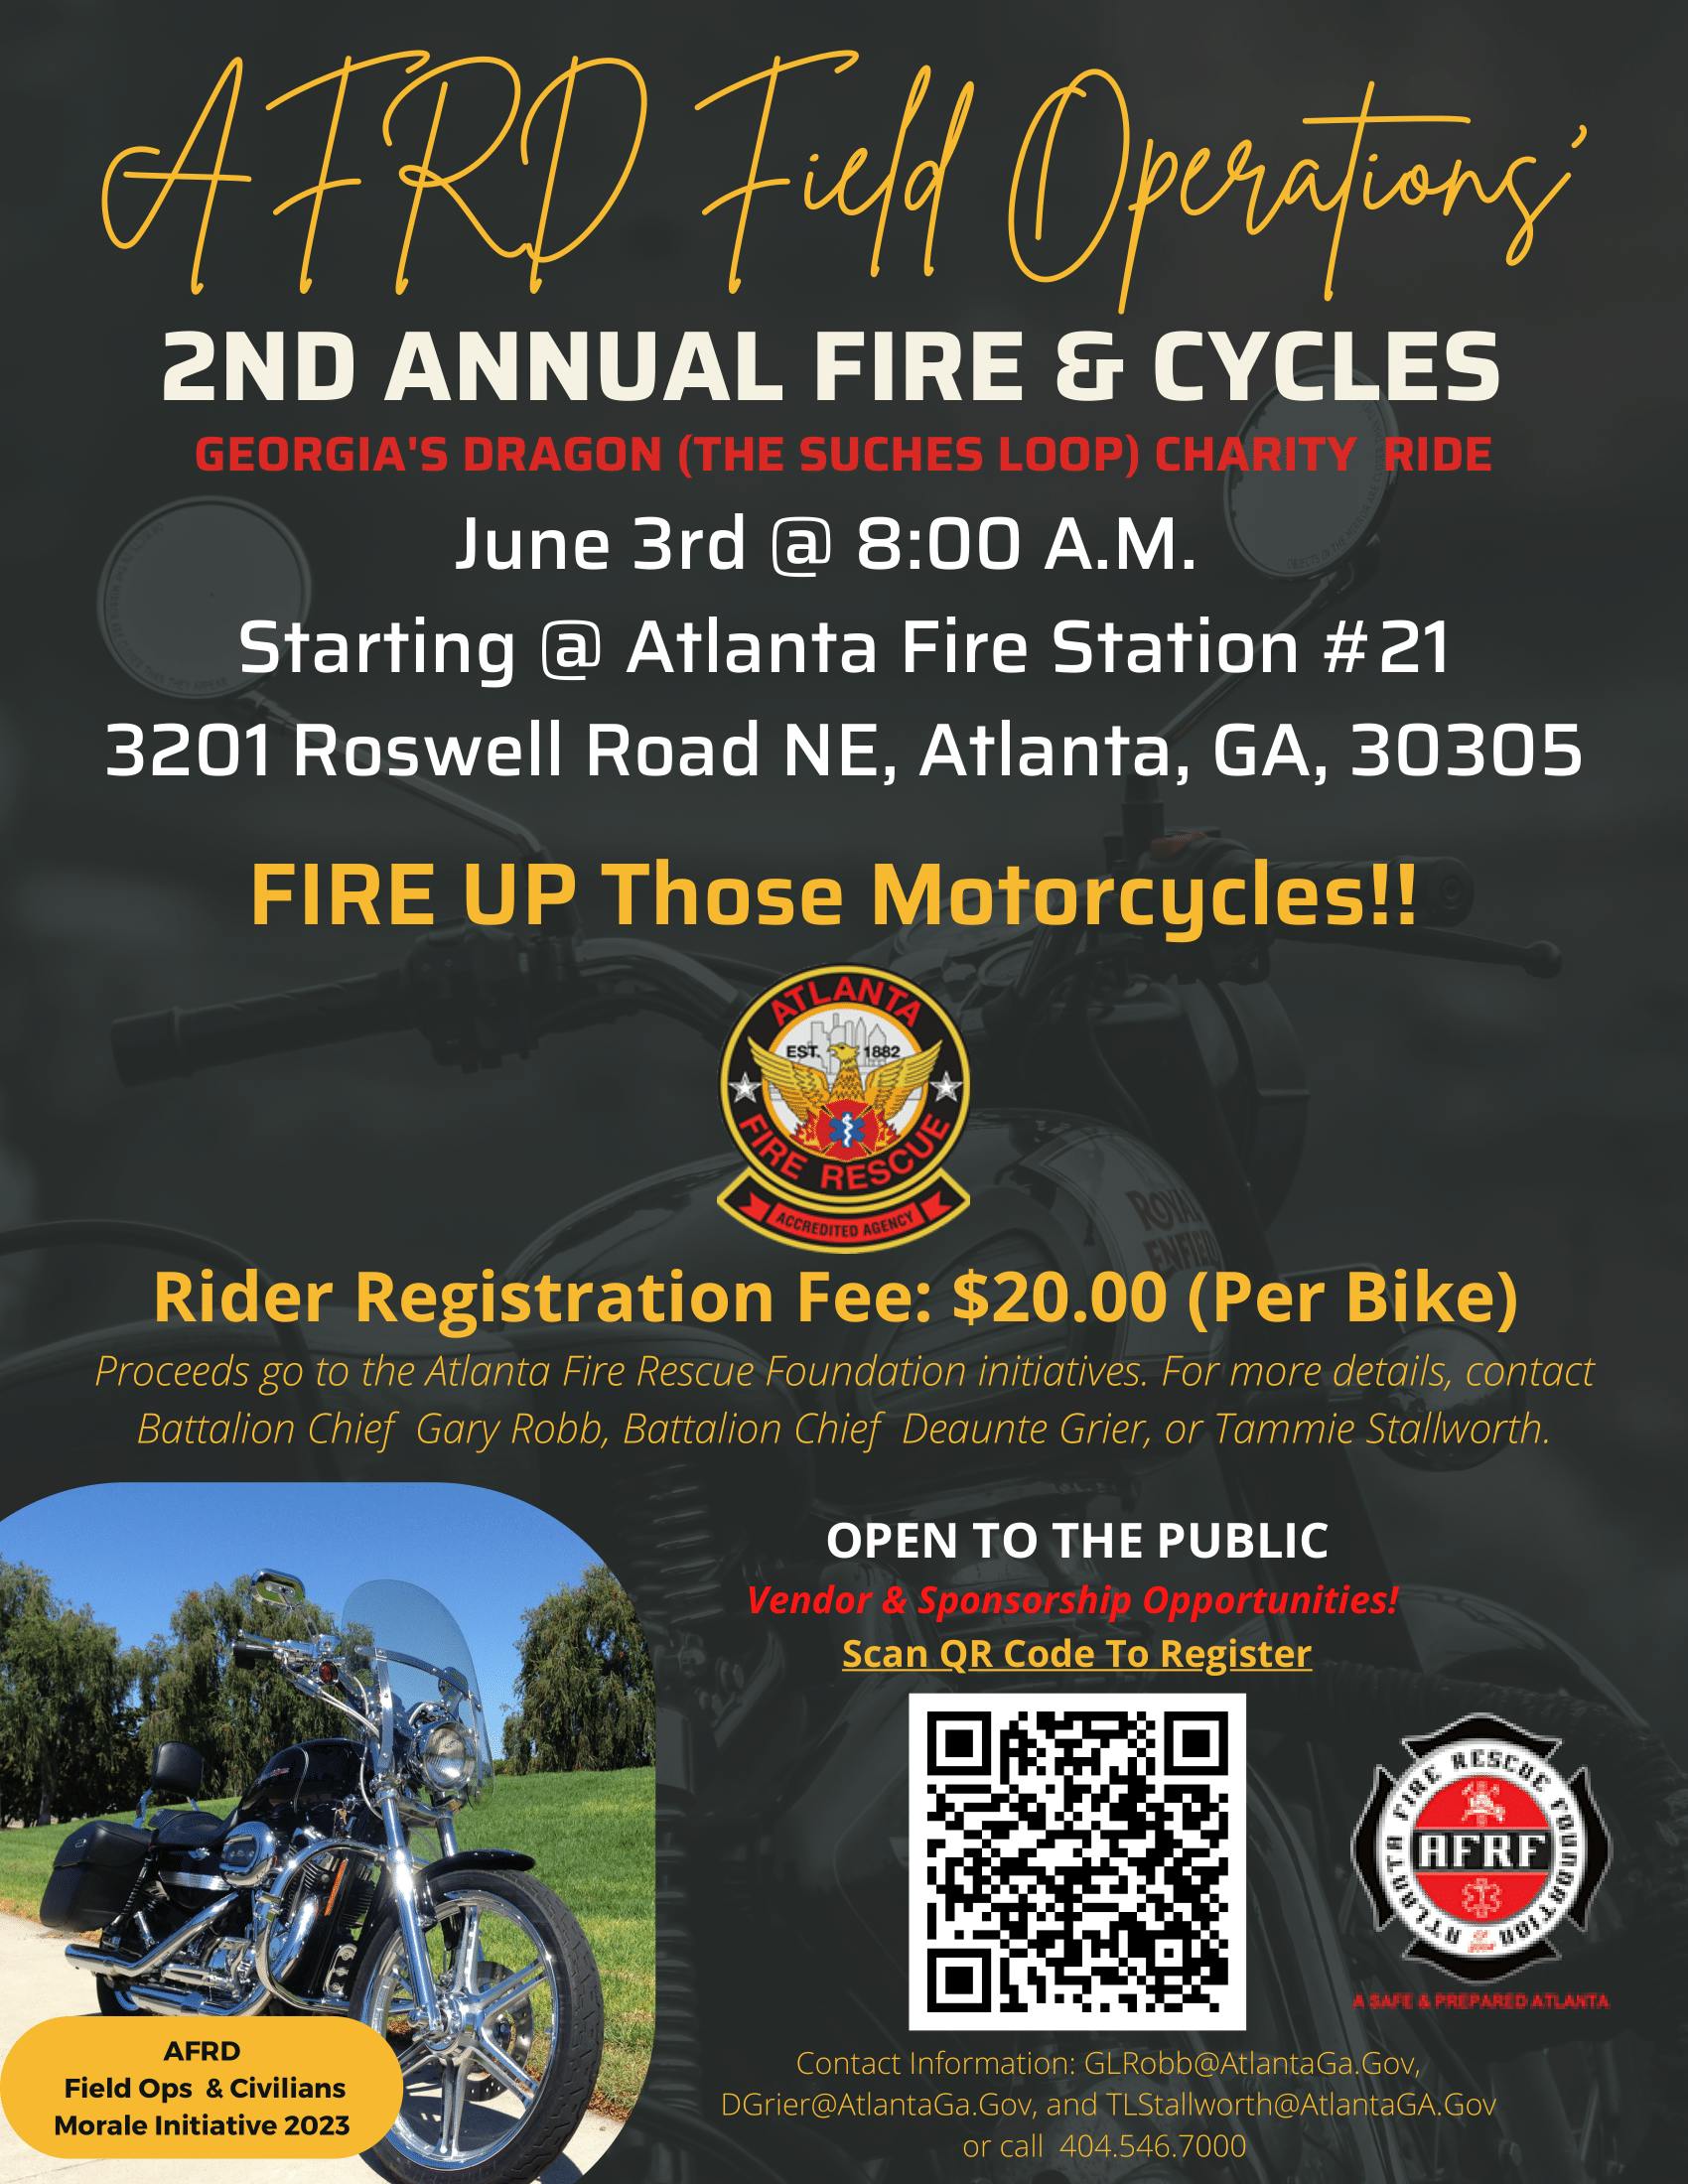 Enjoy the second annual ride benefits as the co chair ride leader.